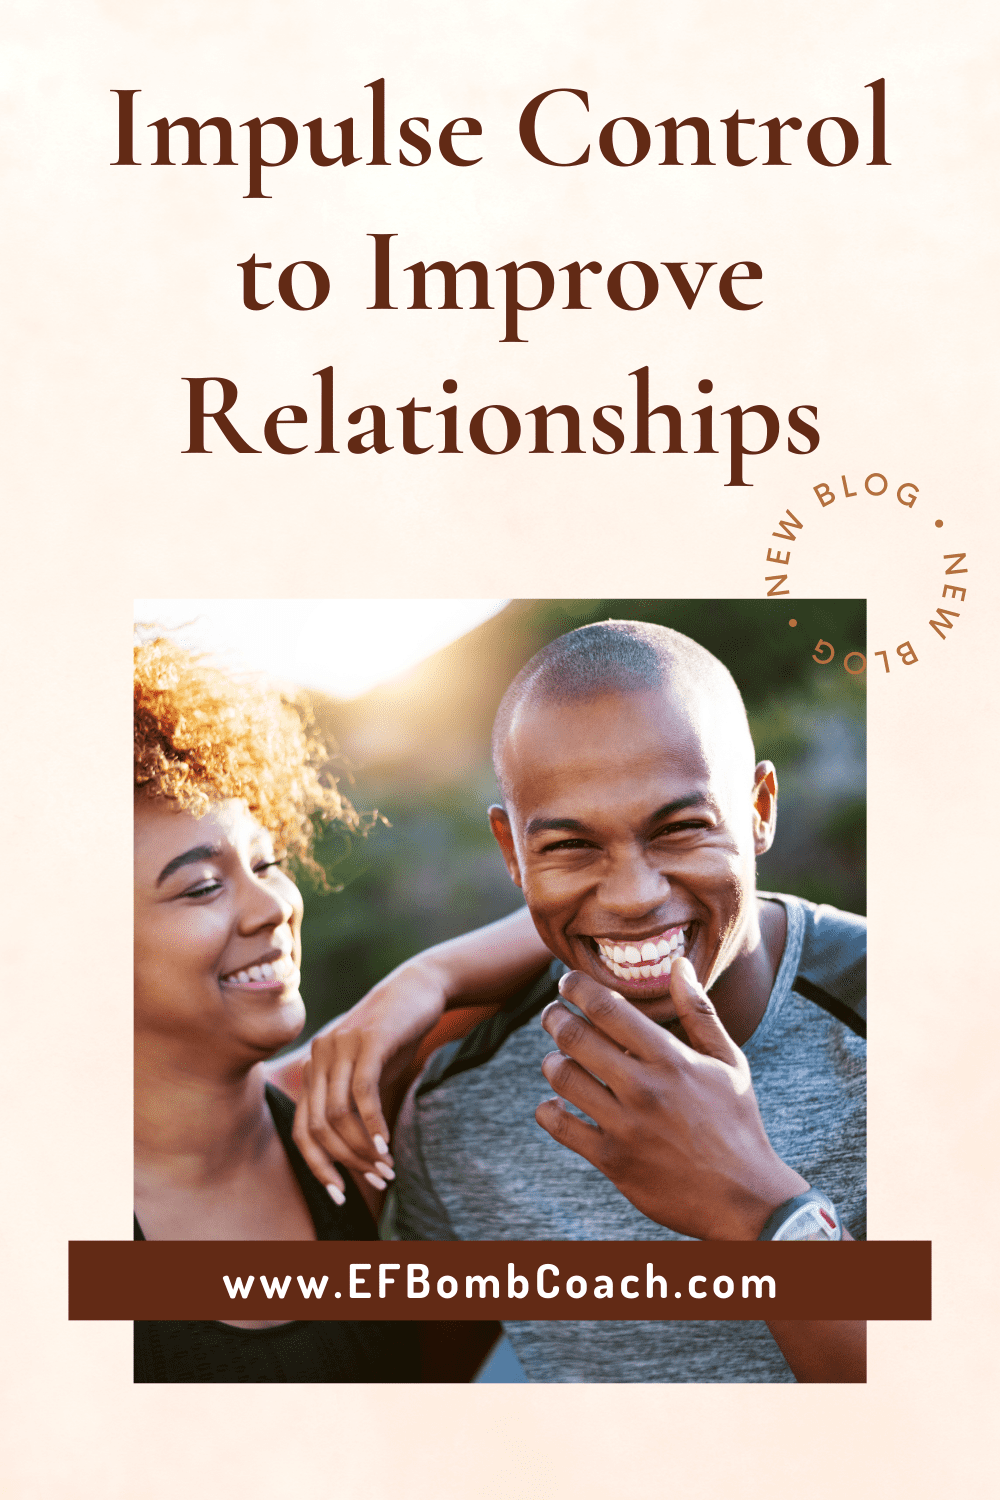 Impulse control to improve relationships